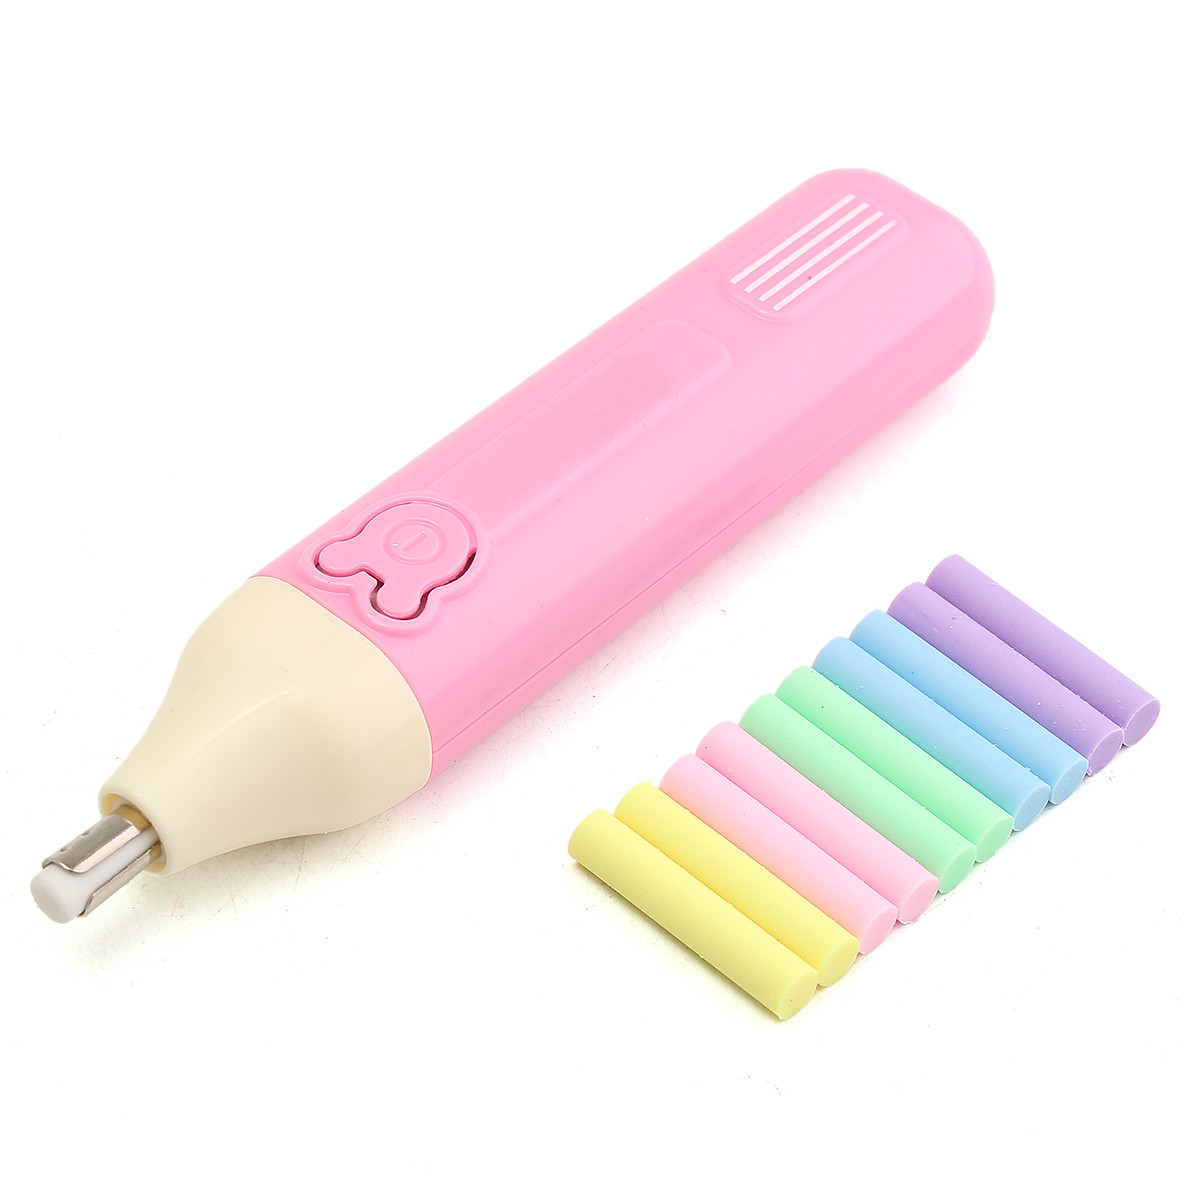 

Easy Use Handy Electric Battery Operated Pencil Eraser Rubber Pen with 11 Refills